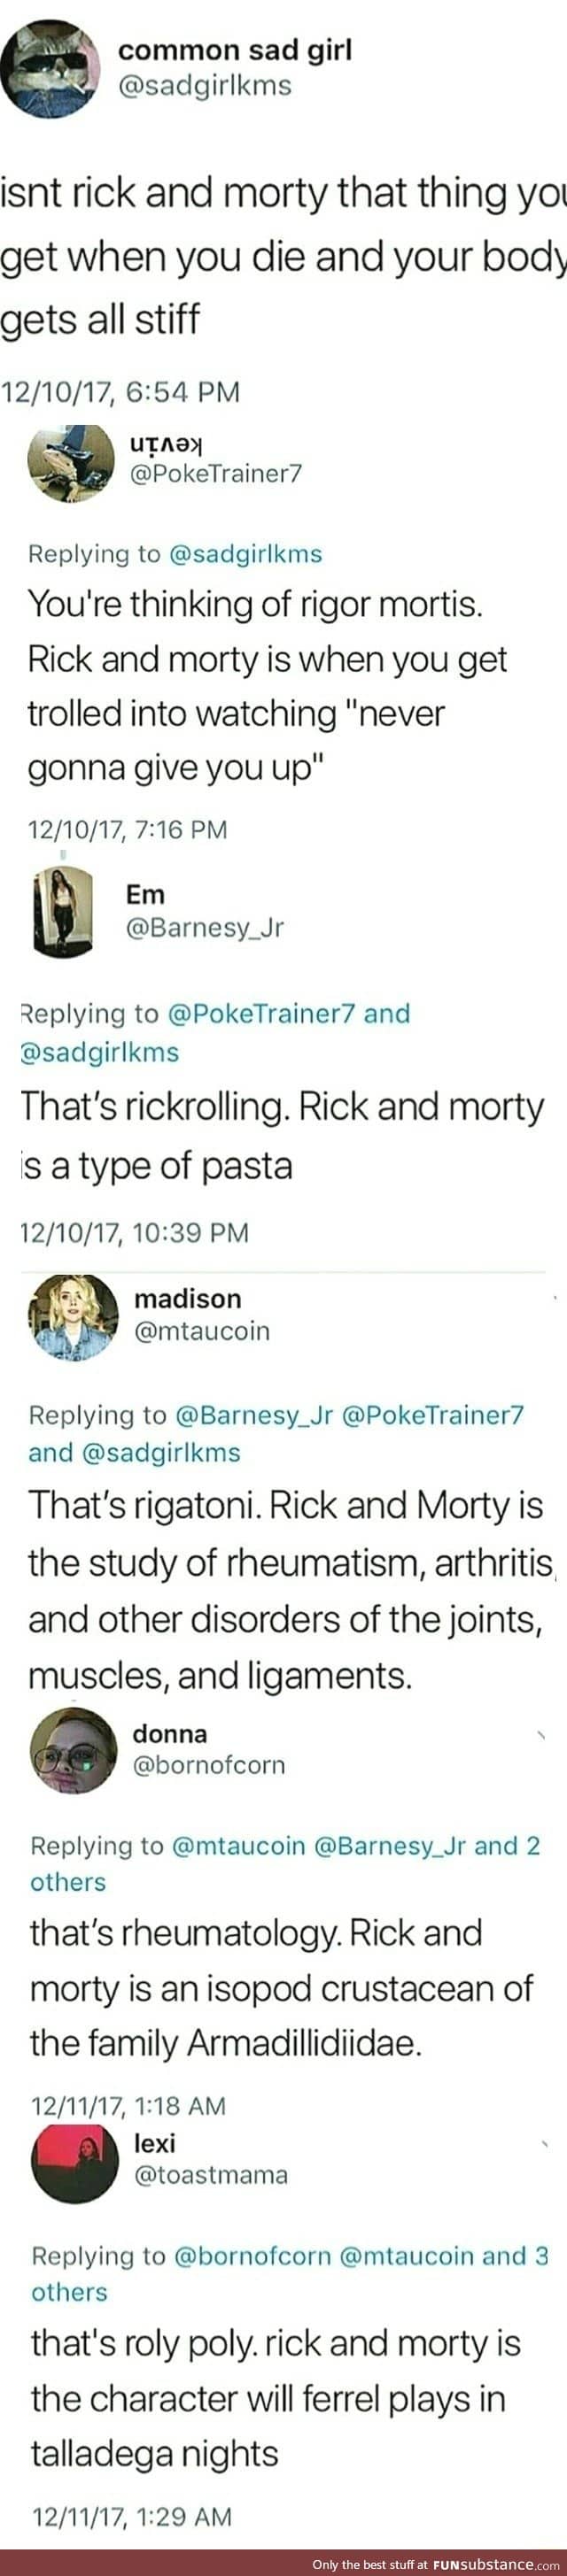 What's Rick and Morty